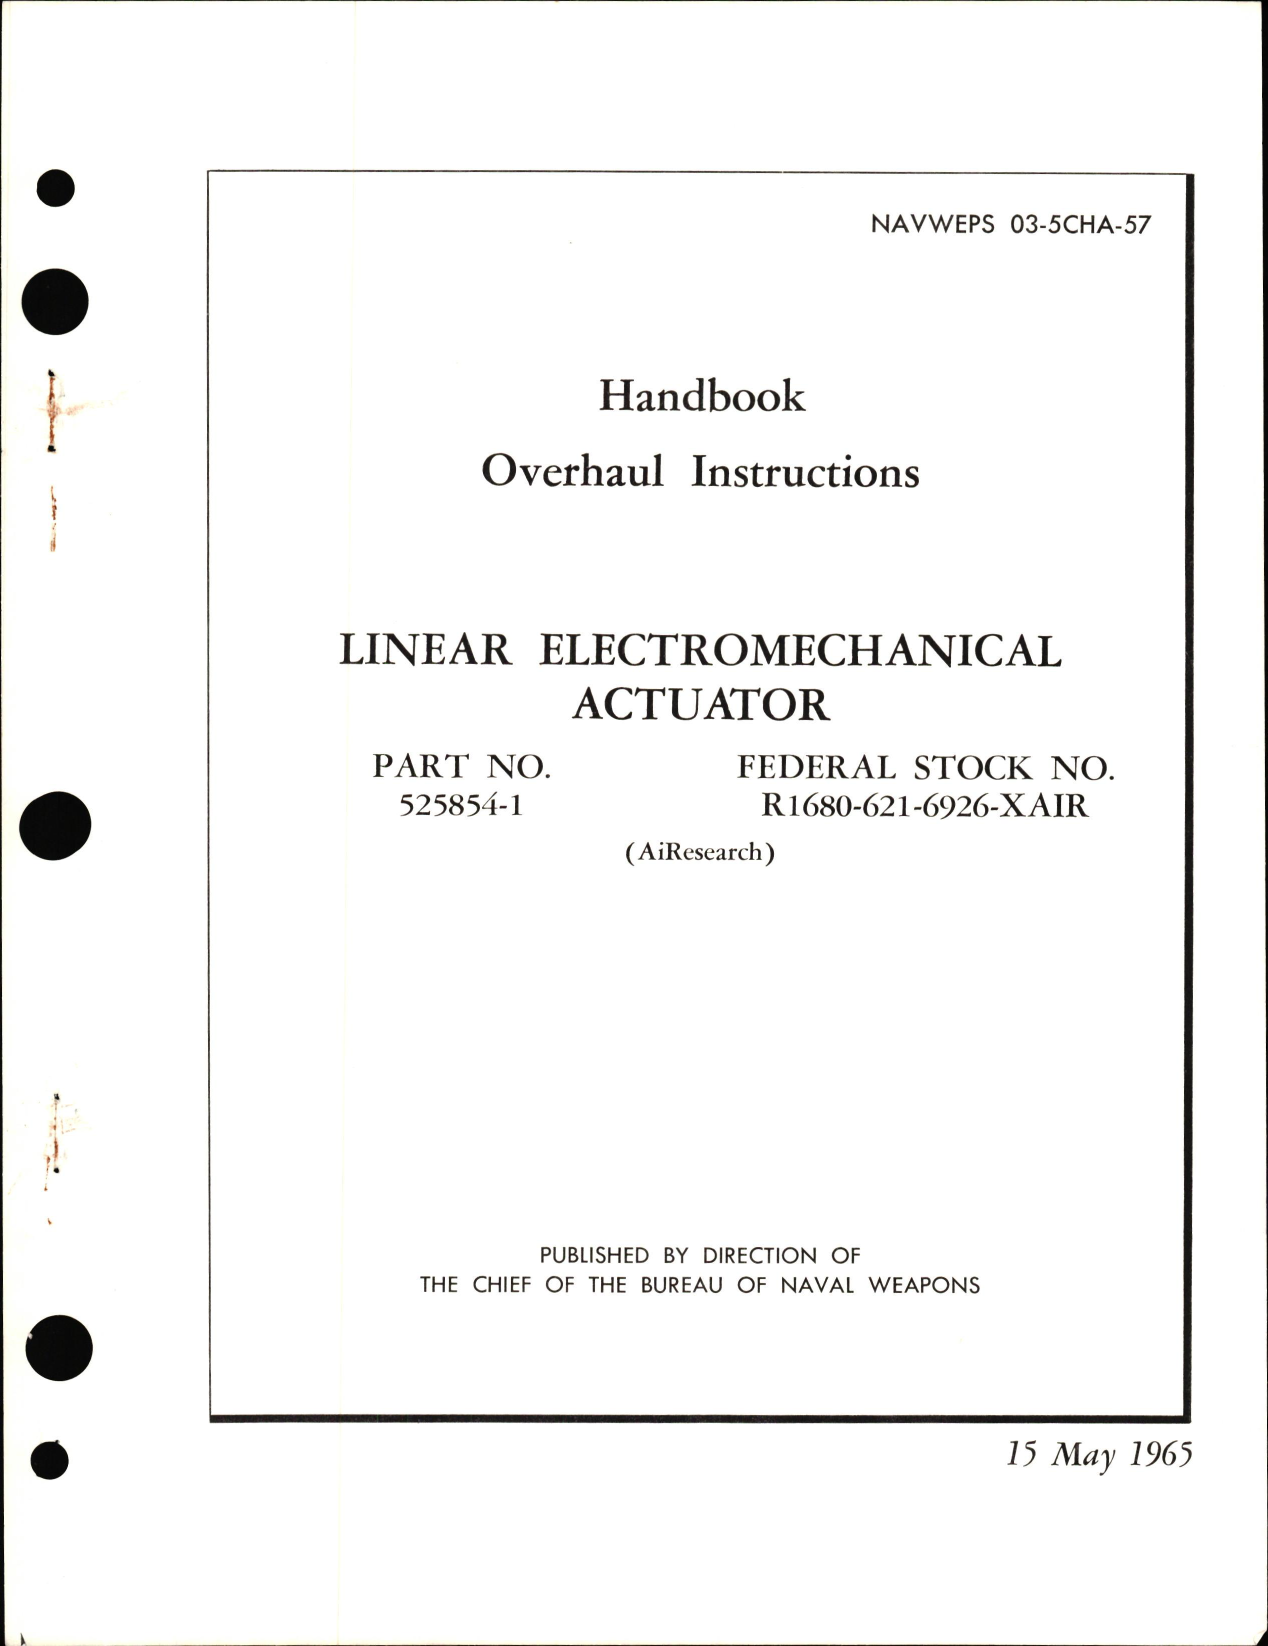 Sample page 1 from AirCorps Library document: Overhaul Instructions for Linear Electromechanical Actuator - Part 525854-1